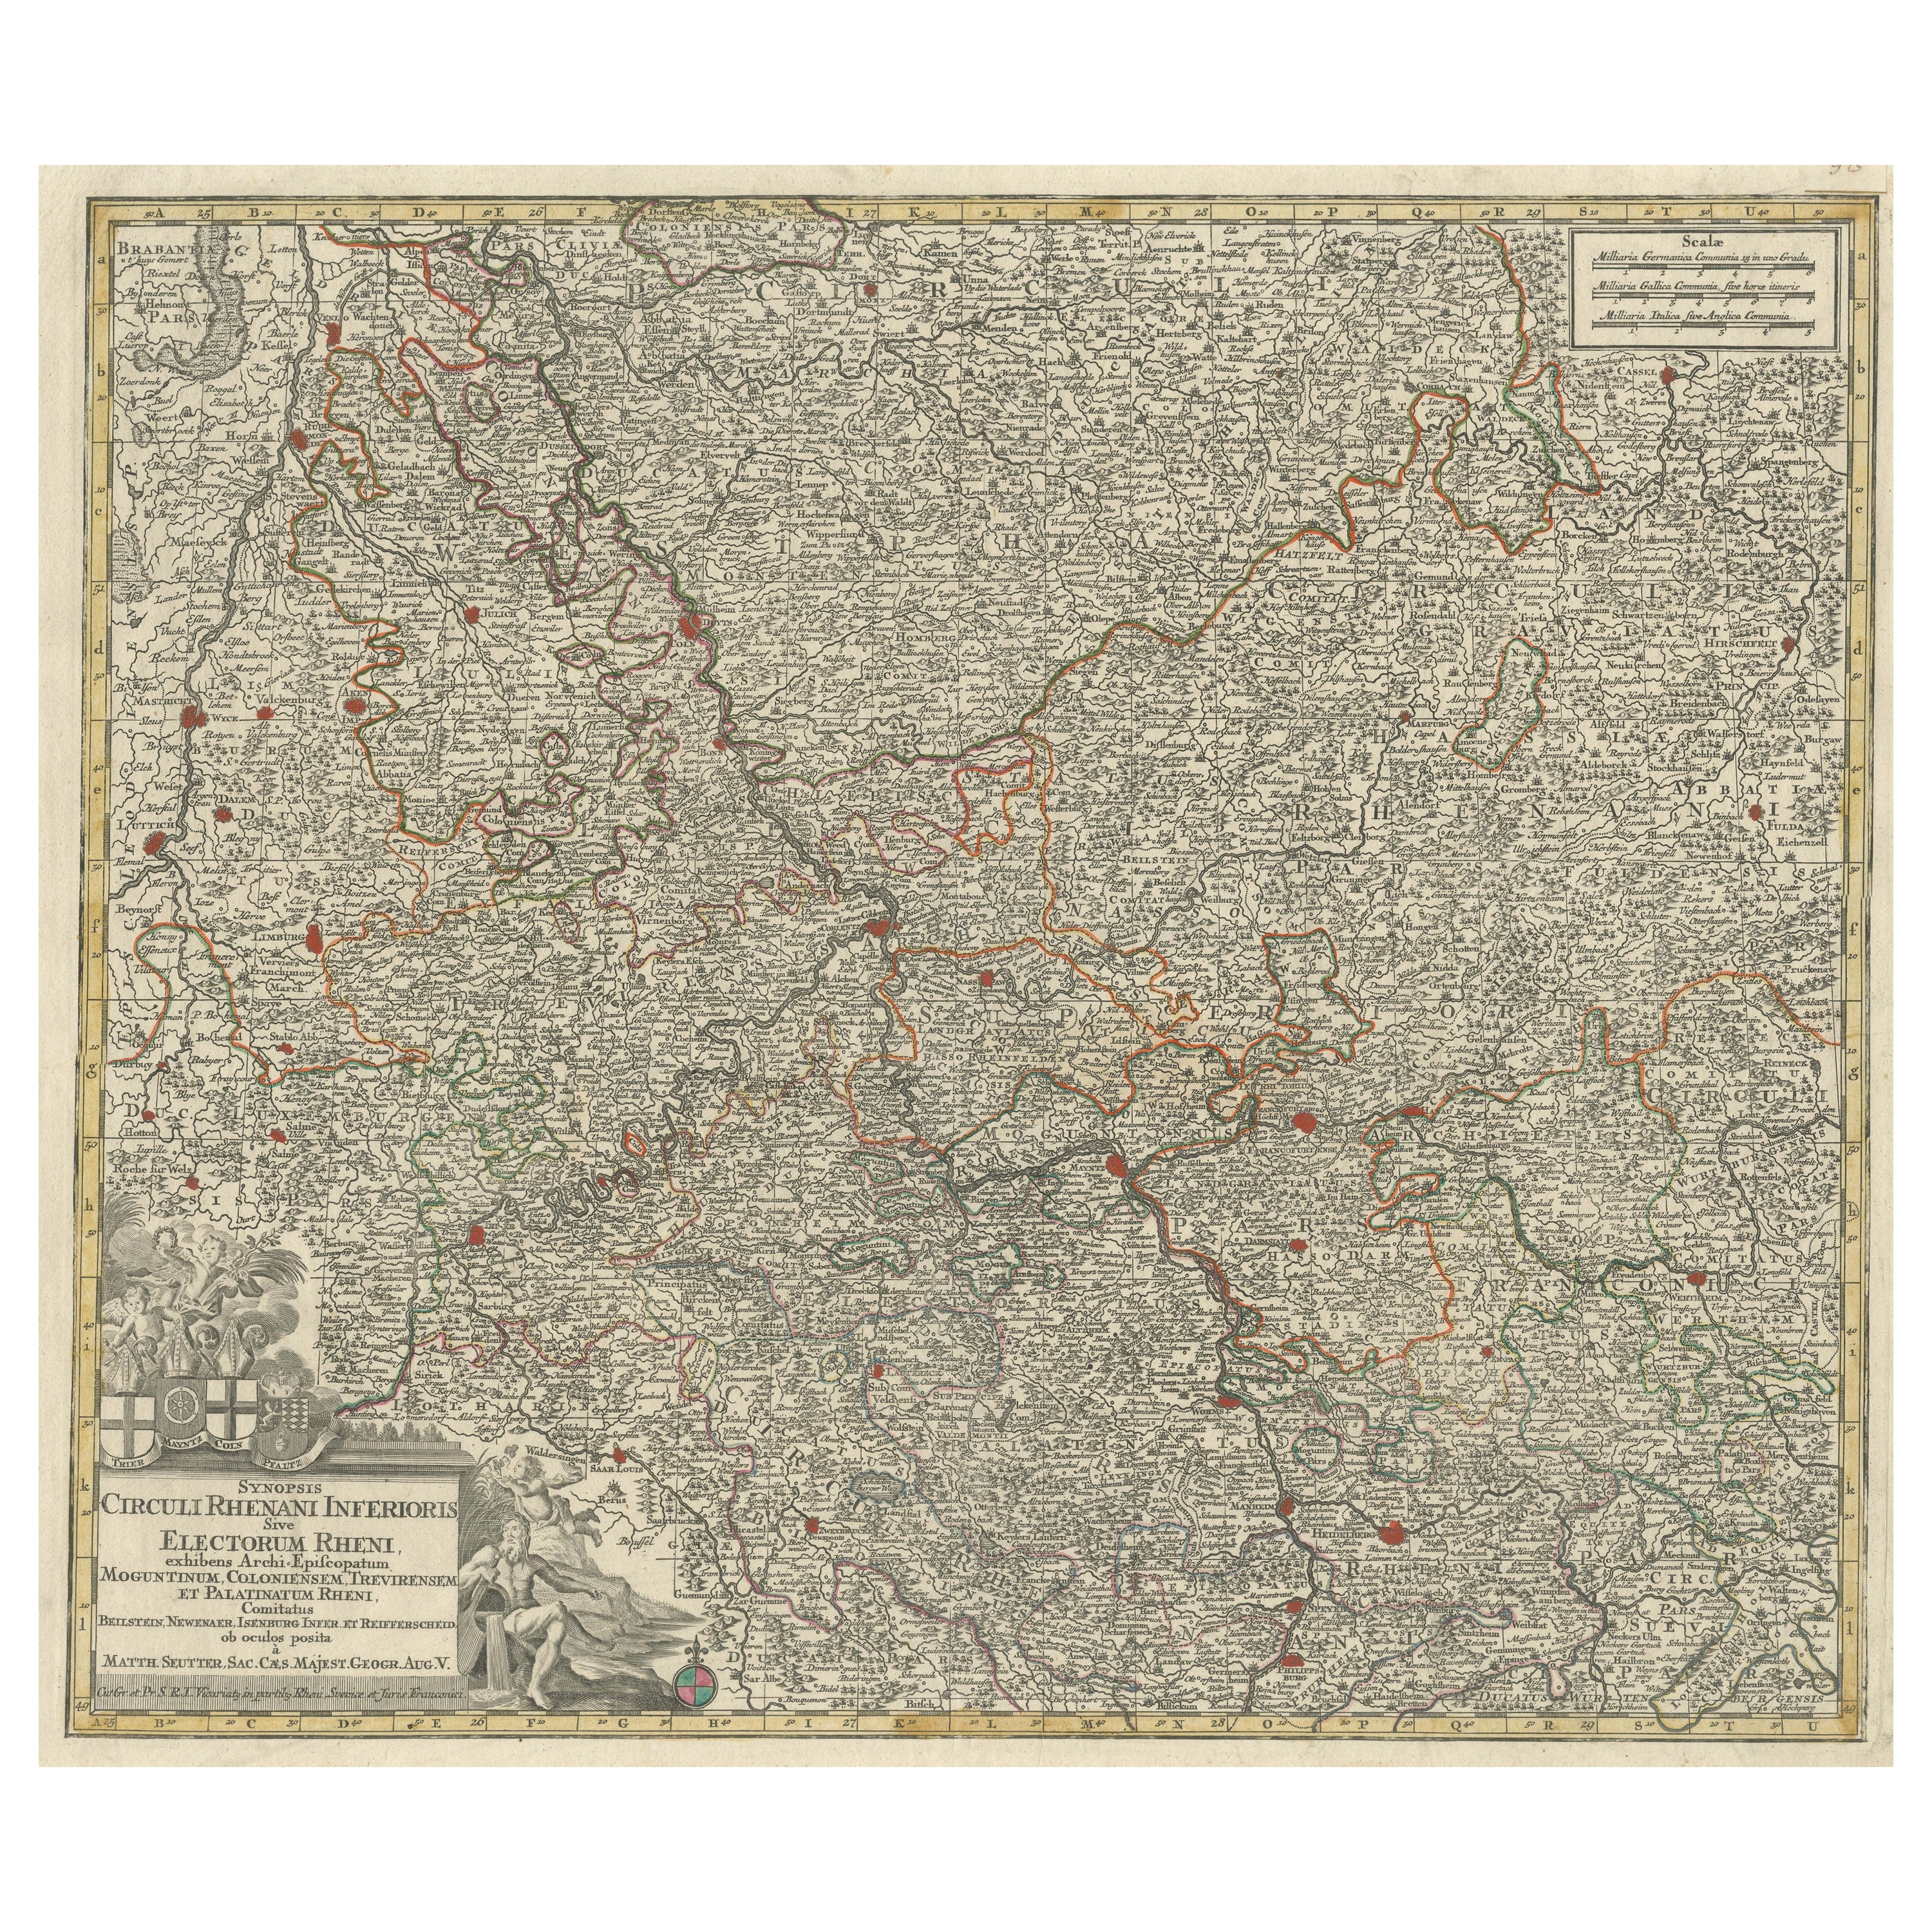 Antique Map of Trier, Mainz, Cologne and surroundings, Germany